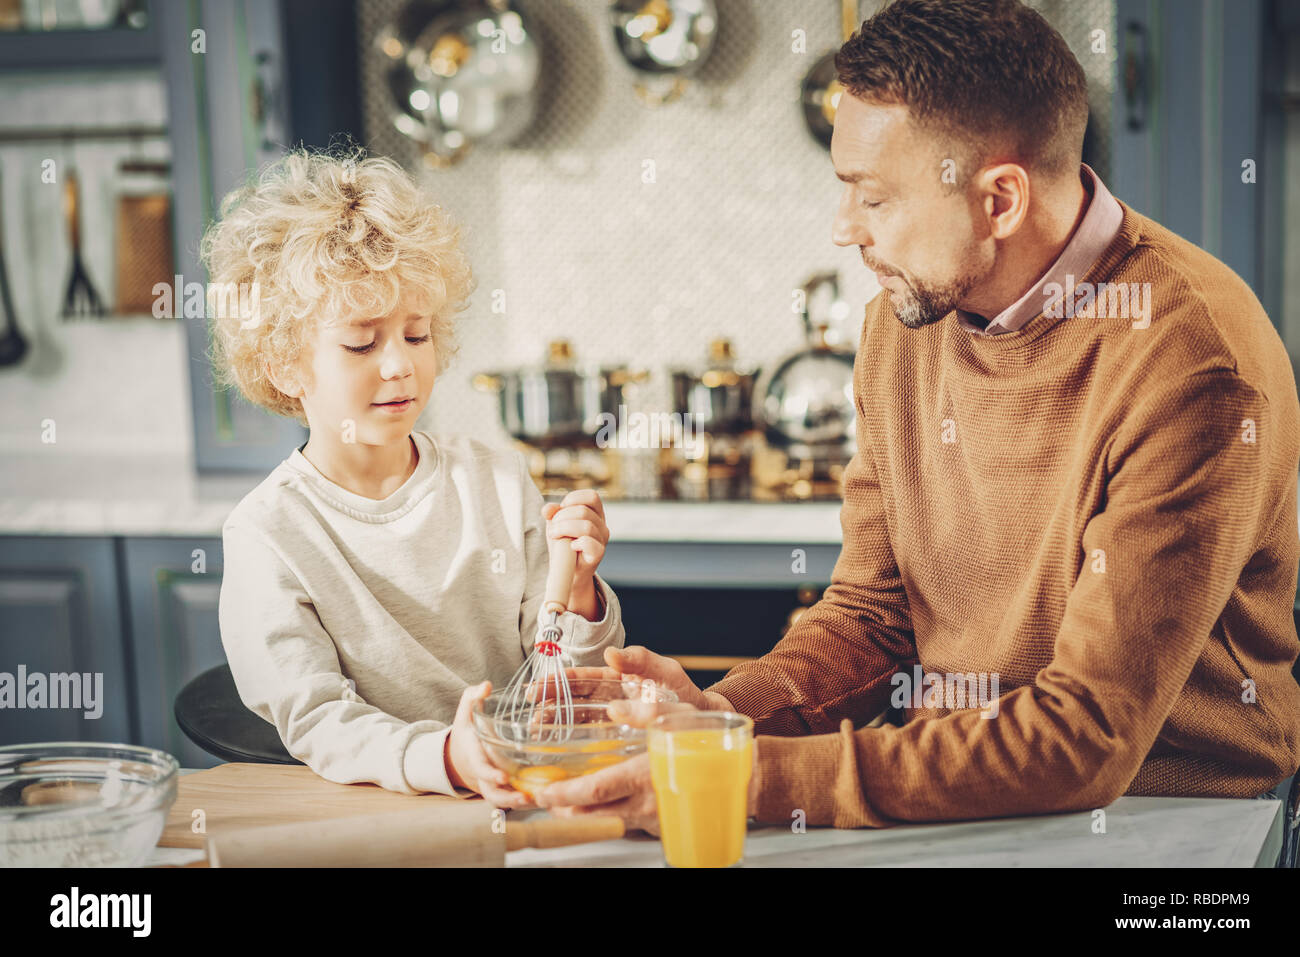 Total concentration. Calm determined man and boy whipping eggs and talking Stock Photo